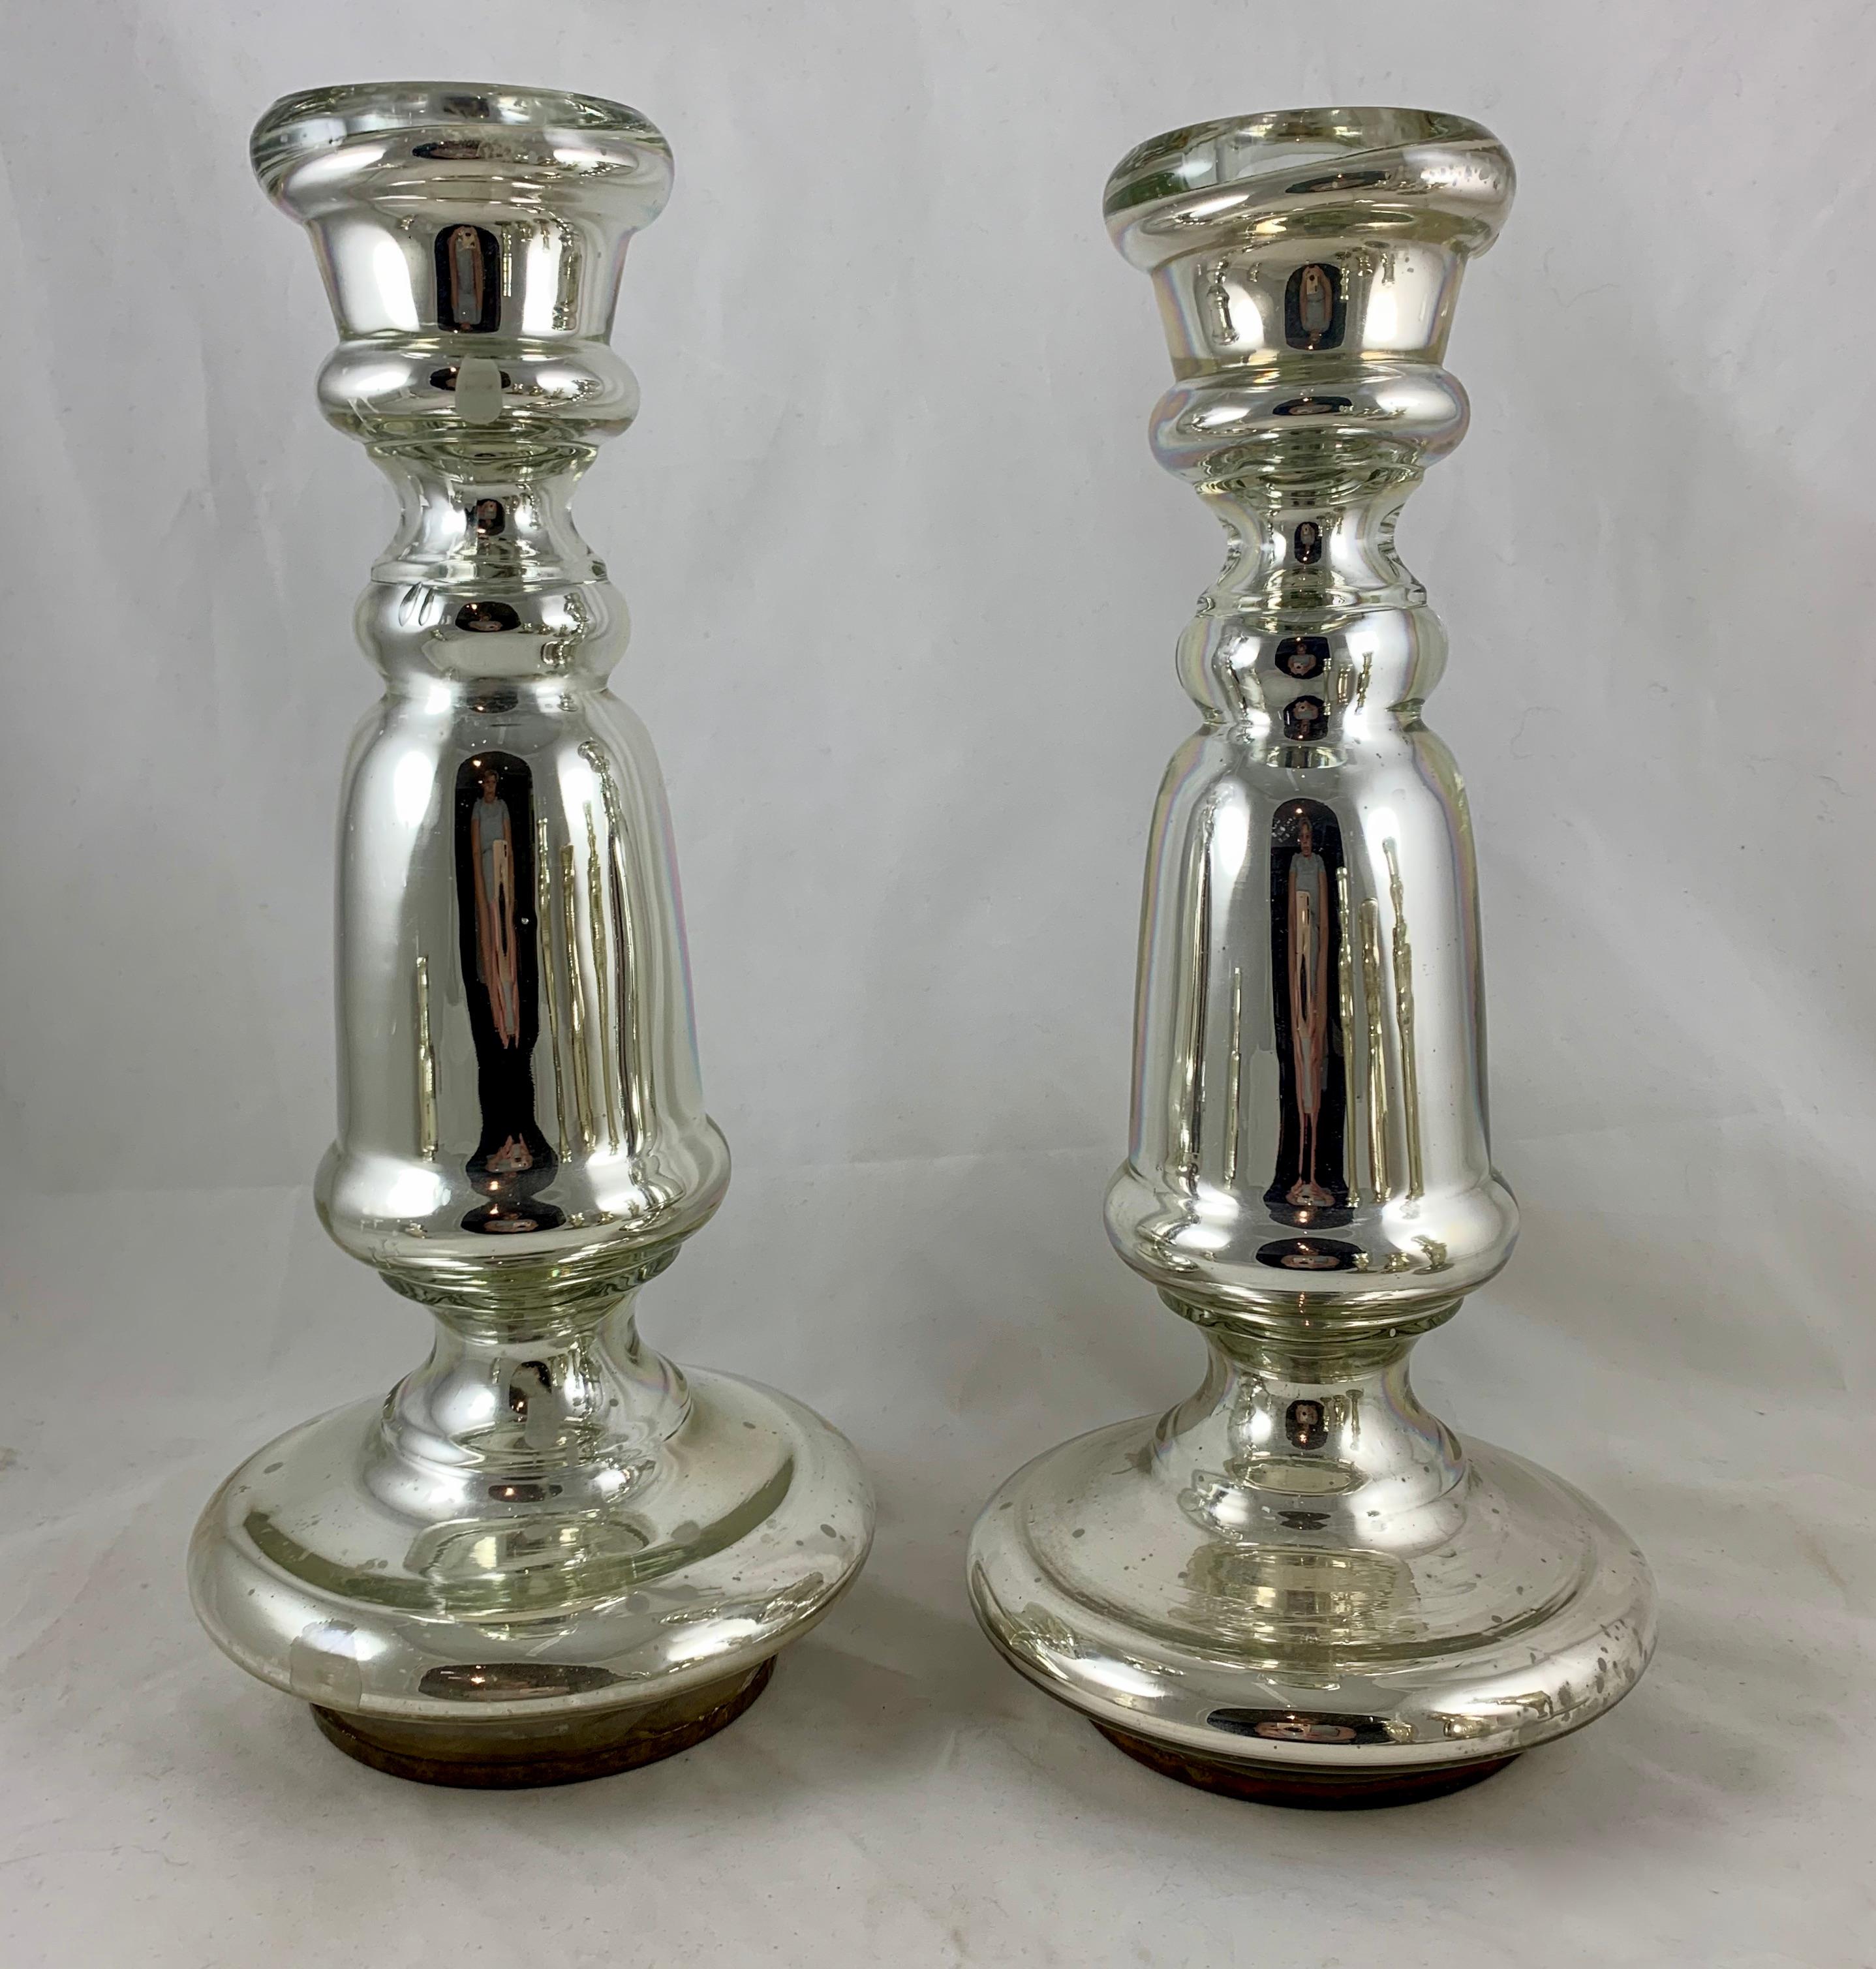 19th Century English Blown Mercury Glass Silvered Candlesticks, Collection of Six, circa 1850